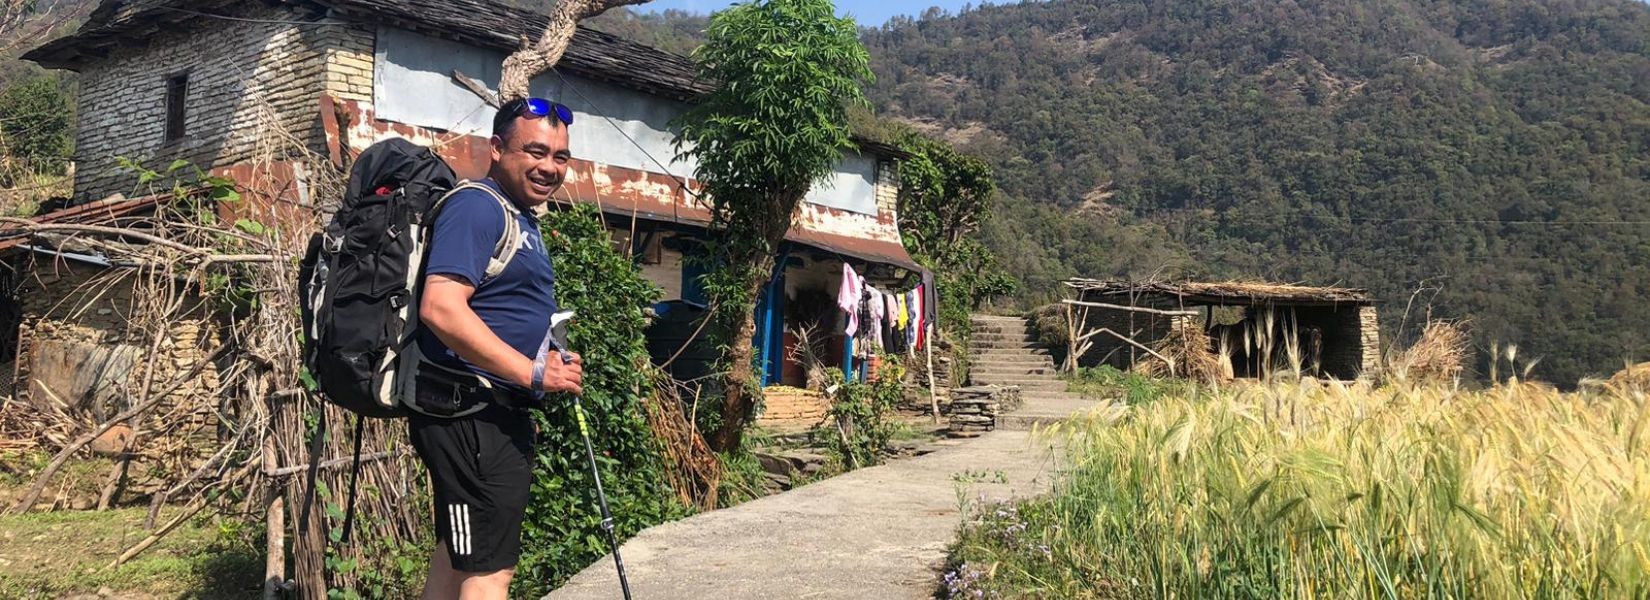 How to hire a Trekking Guide in Nepal